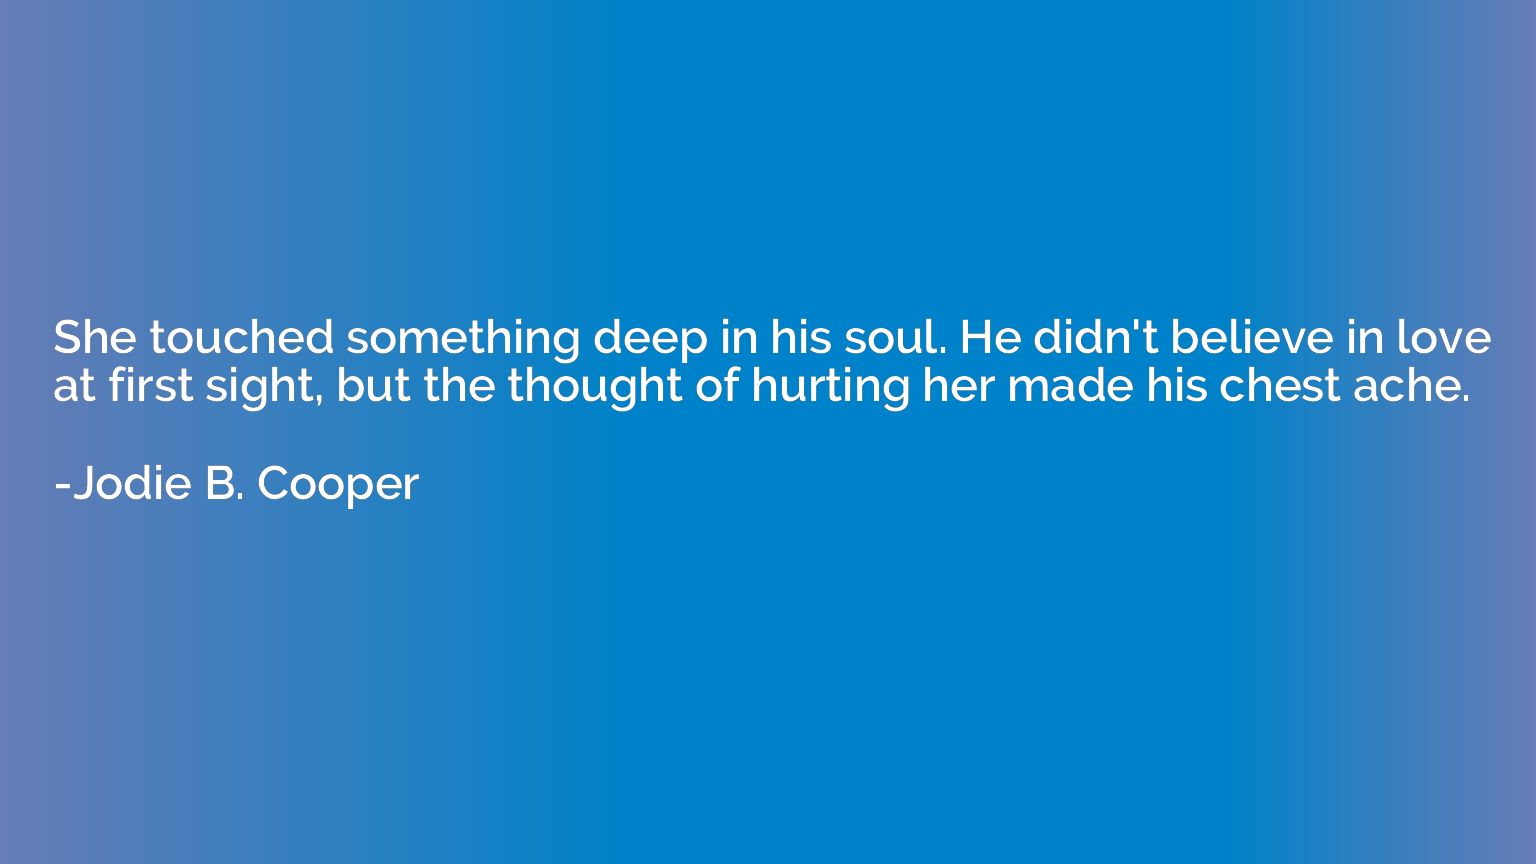 She touched something deep in his soul. He didn't believe in